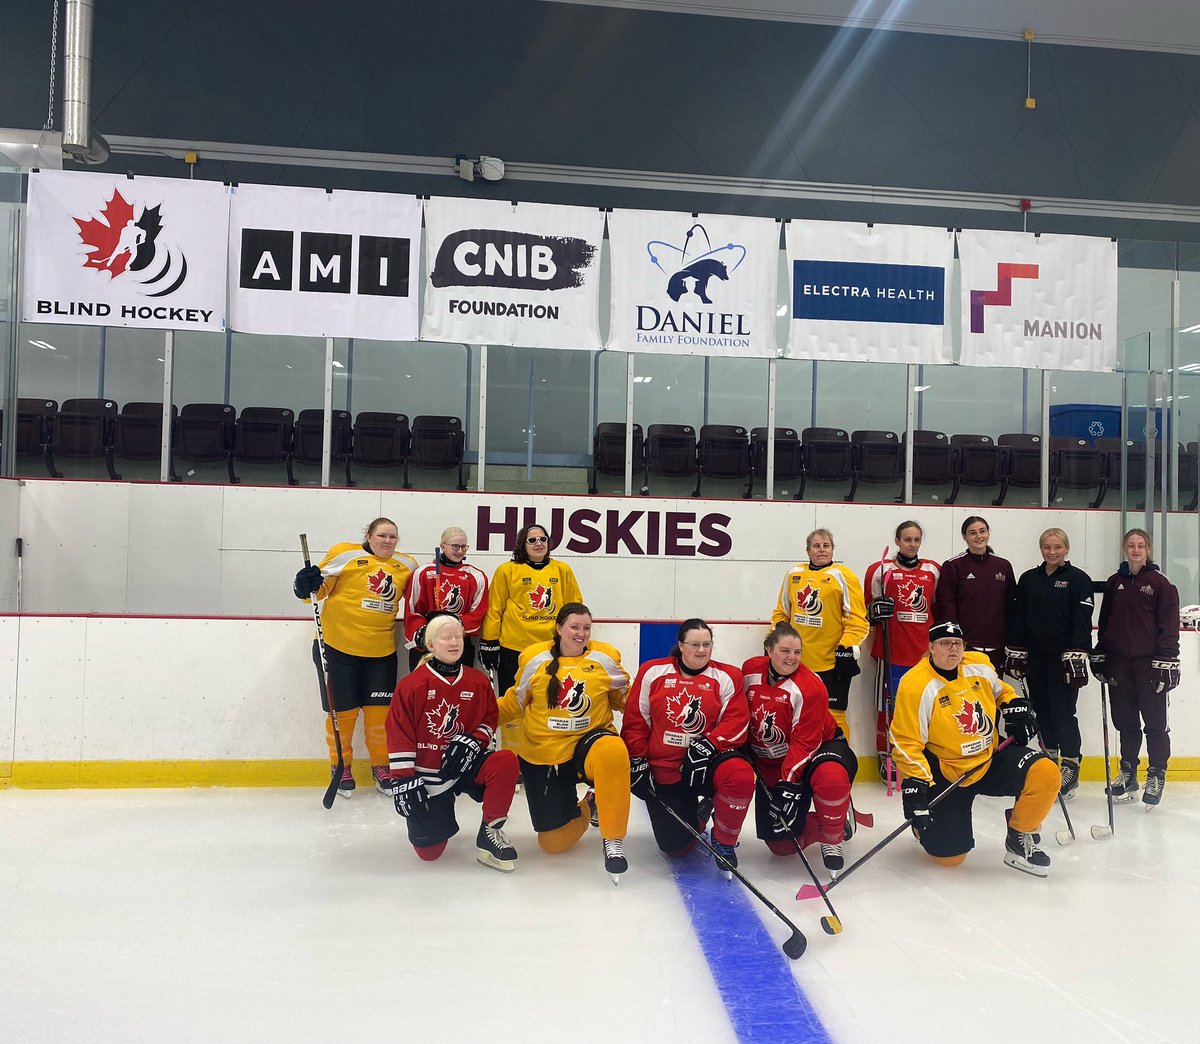 This World Girls' Ice Hockey Weekend, Canadian Blind Hockey would like to celebrate all the girls and women who are helping to grow our #parasport of #Blind #Hockey in their communities. #WGIHW